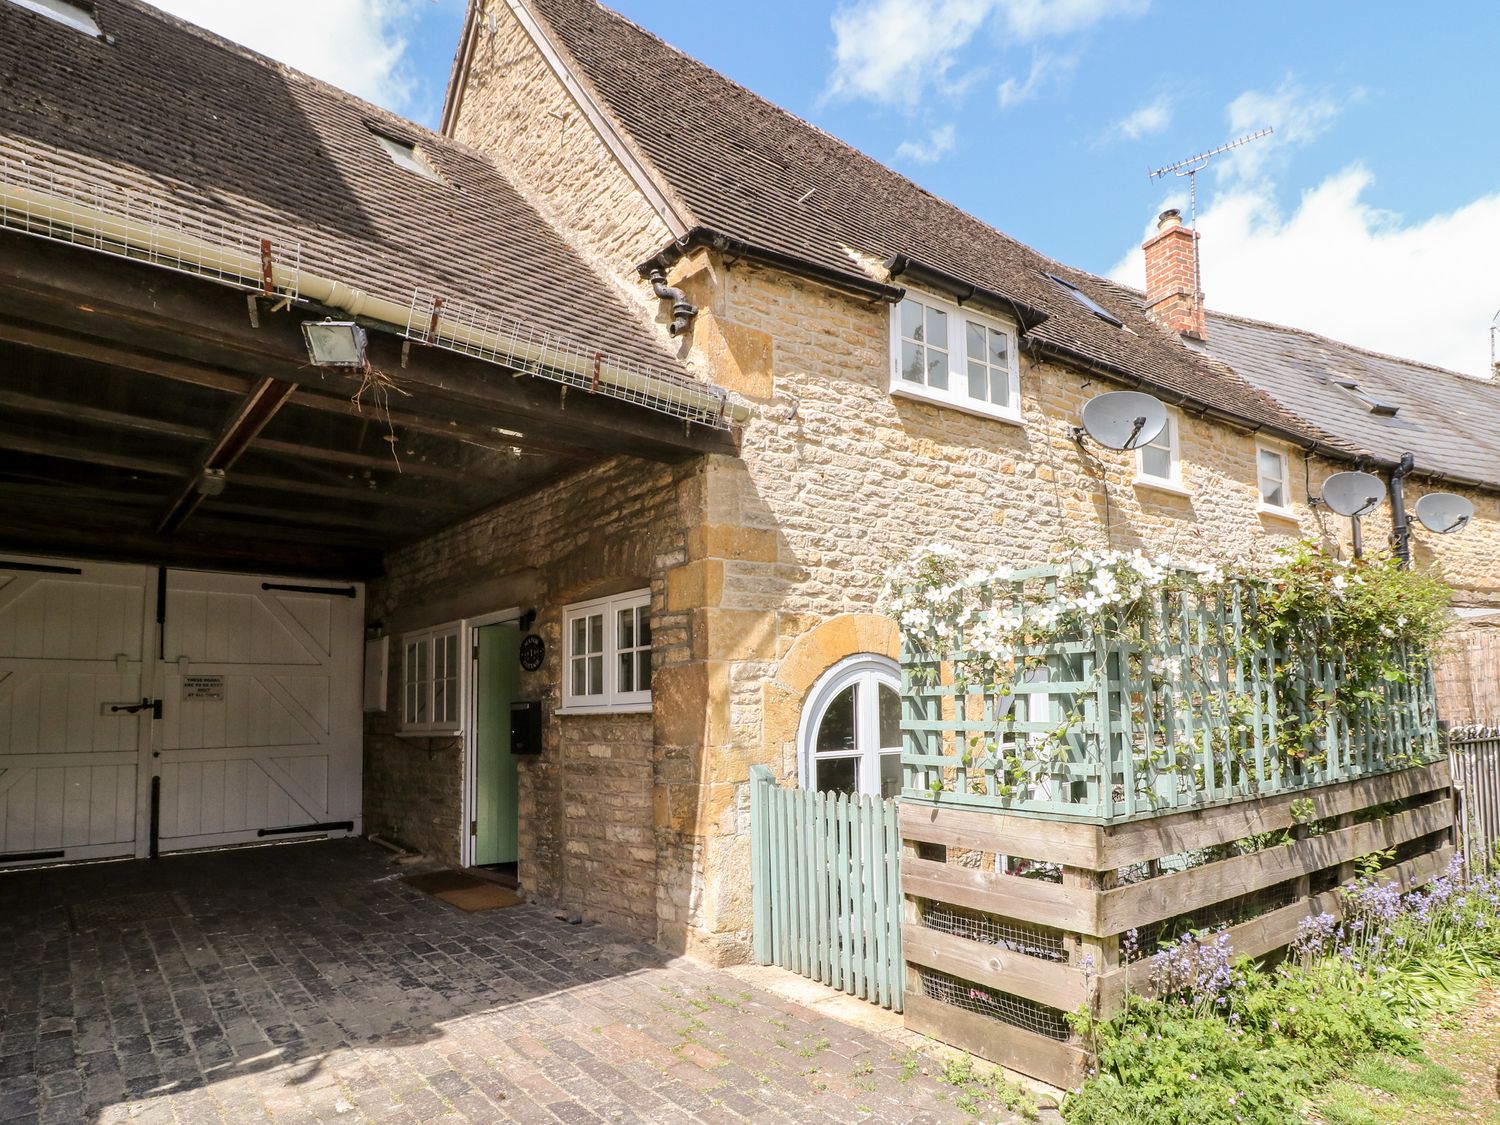 1 Manor Cottage - Cotswolds - 1102755 - photo 1